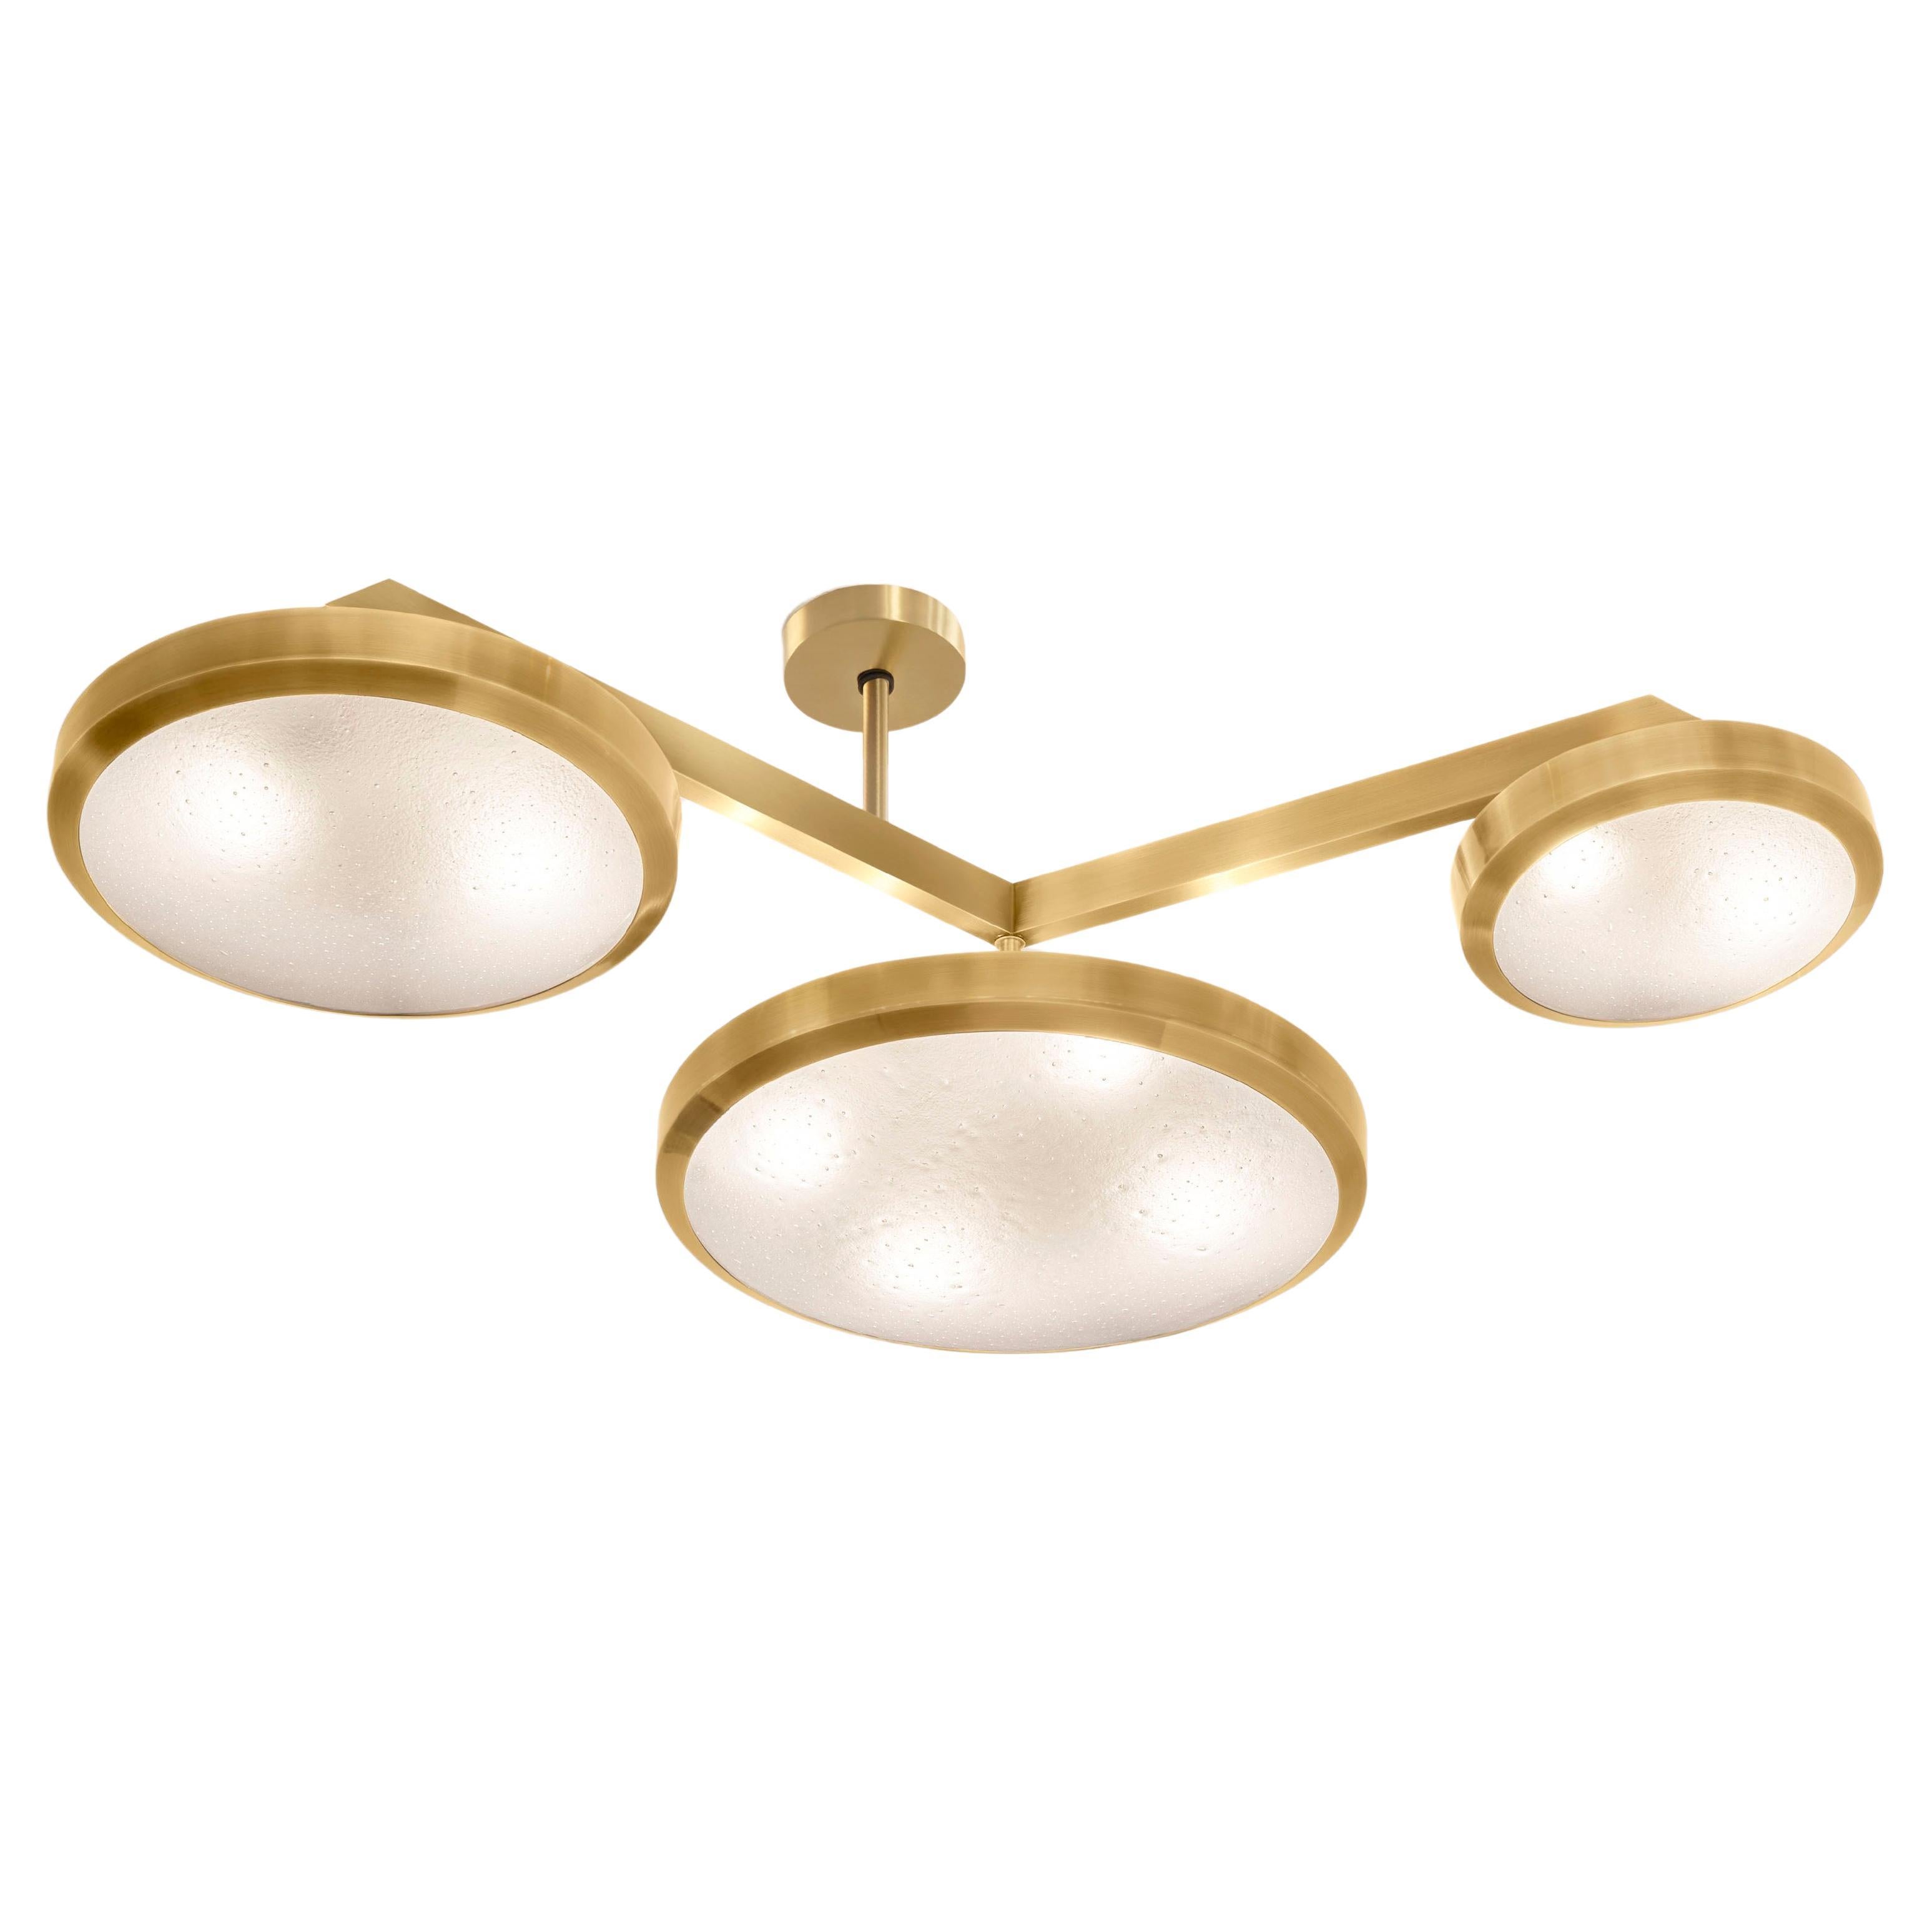 Zeta Ceiling Light by Gaspare Asaro-Satin Brass Finish For Sale